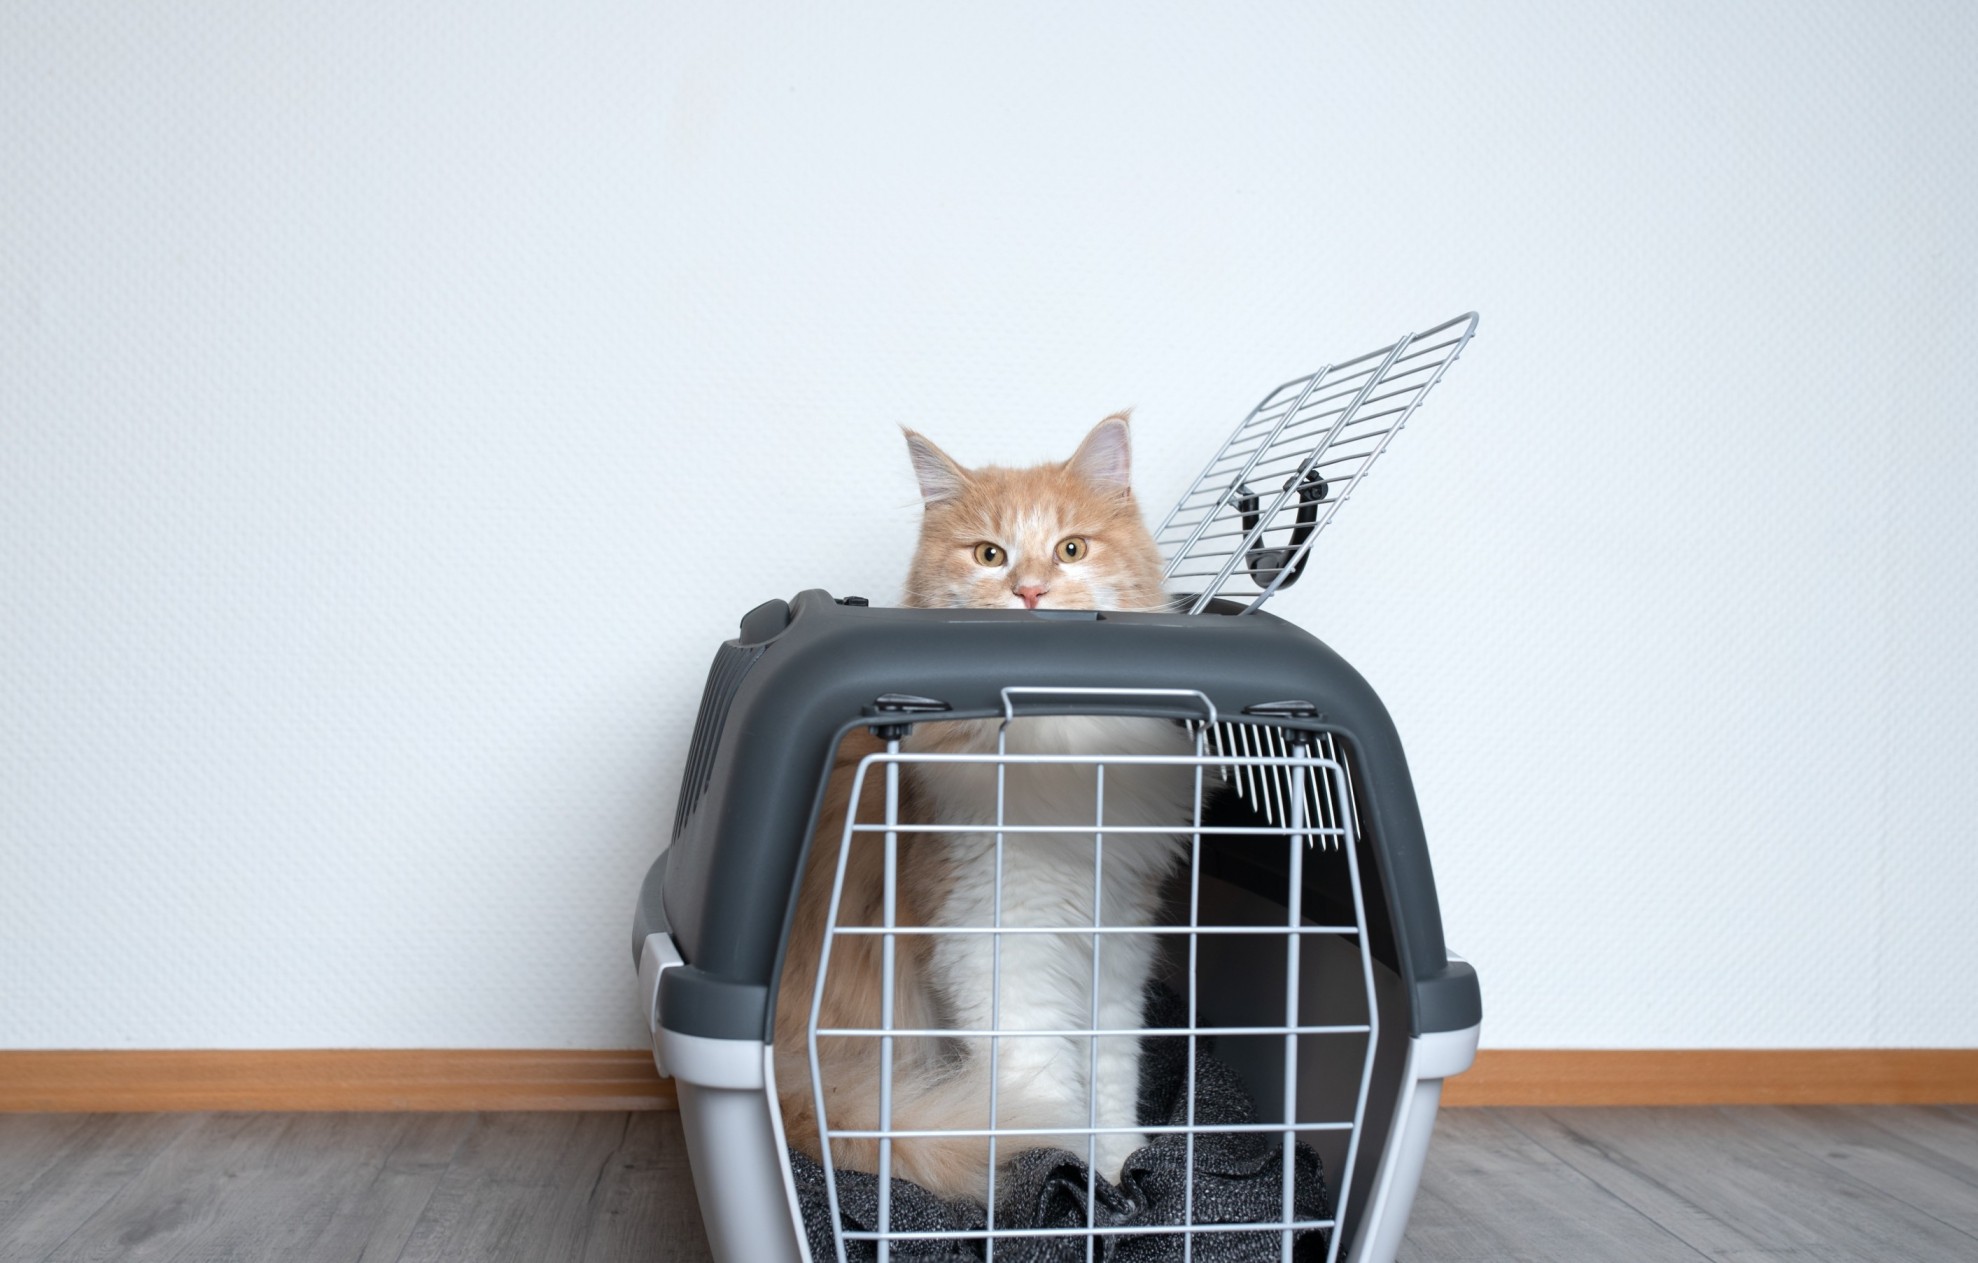 A cat peeking outside a carrier indoors